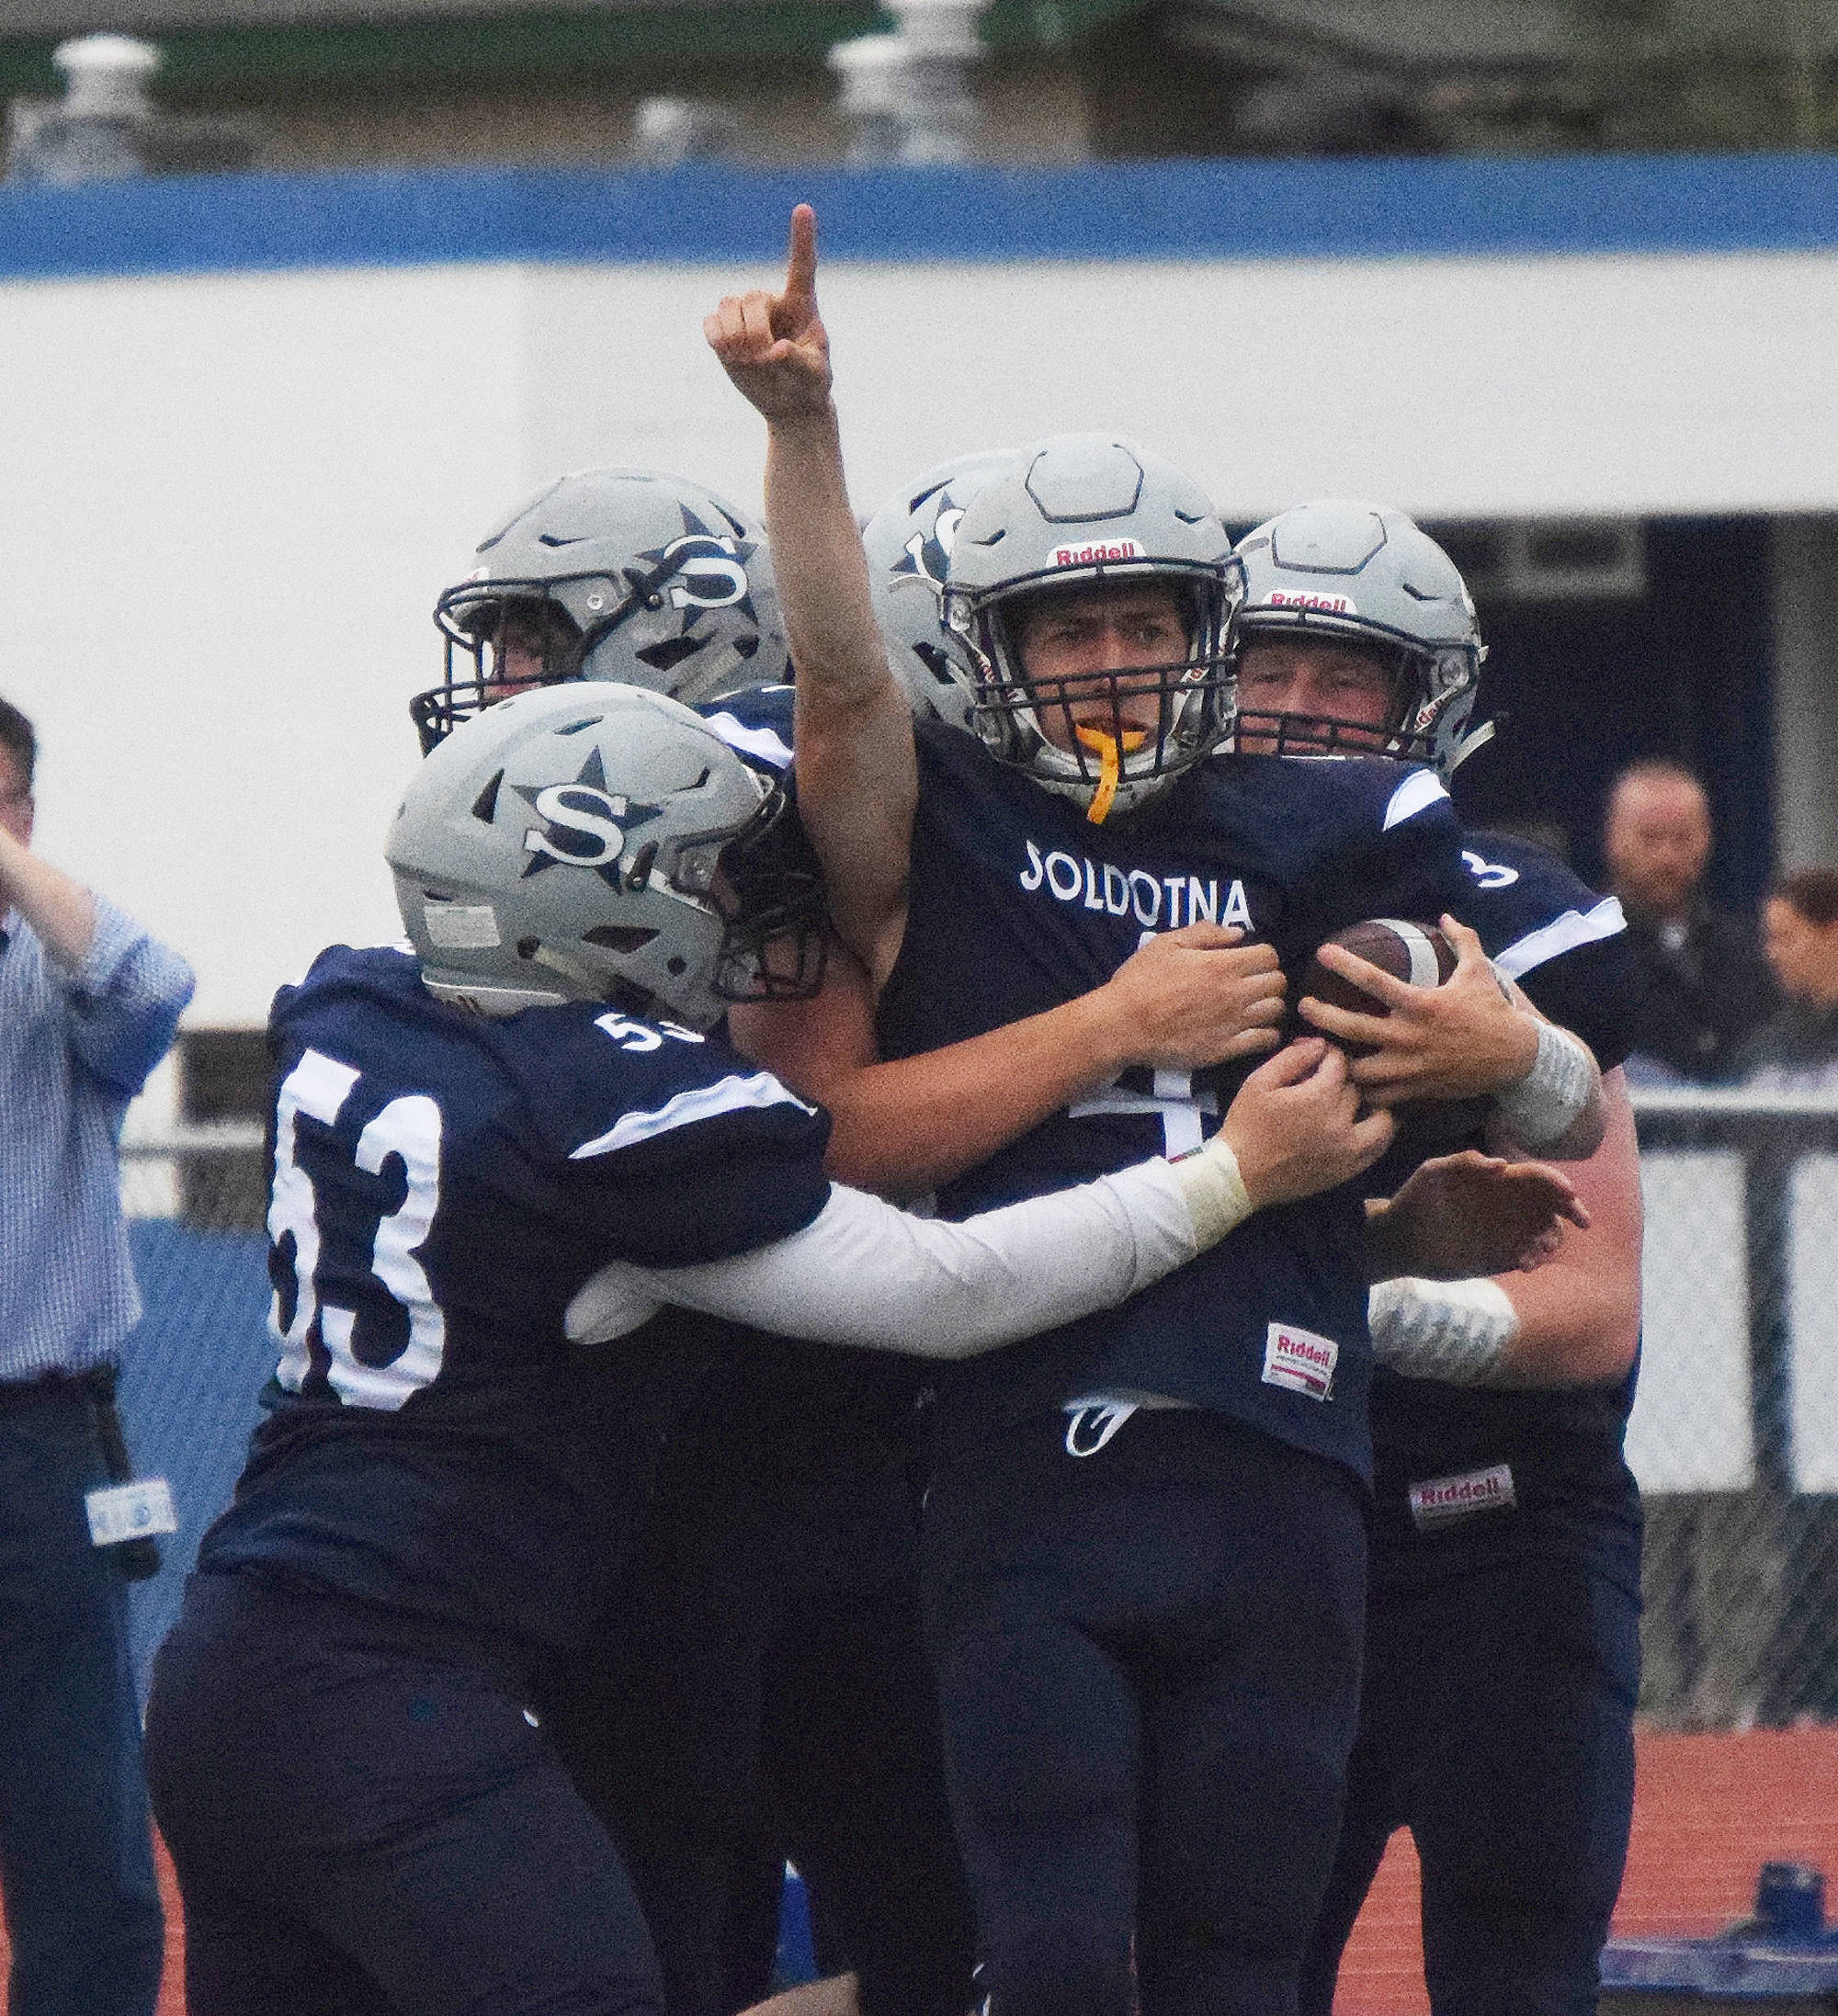 Soldotna junior Jersey Truesdell (pointing) is mobbed by teammates after scoring a touchdown Aug. 10, 2018, against West Anchorage at Justin Maile Field in Soldotna. (Photo by Joey Klecka/Peninsula Clarion)